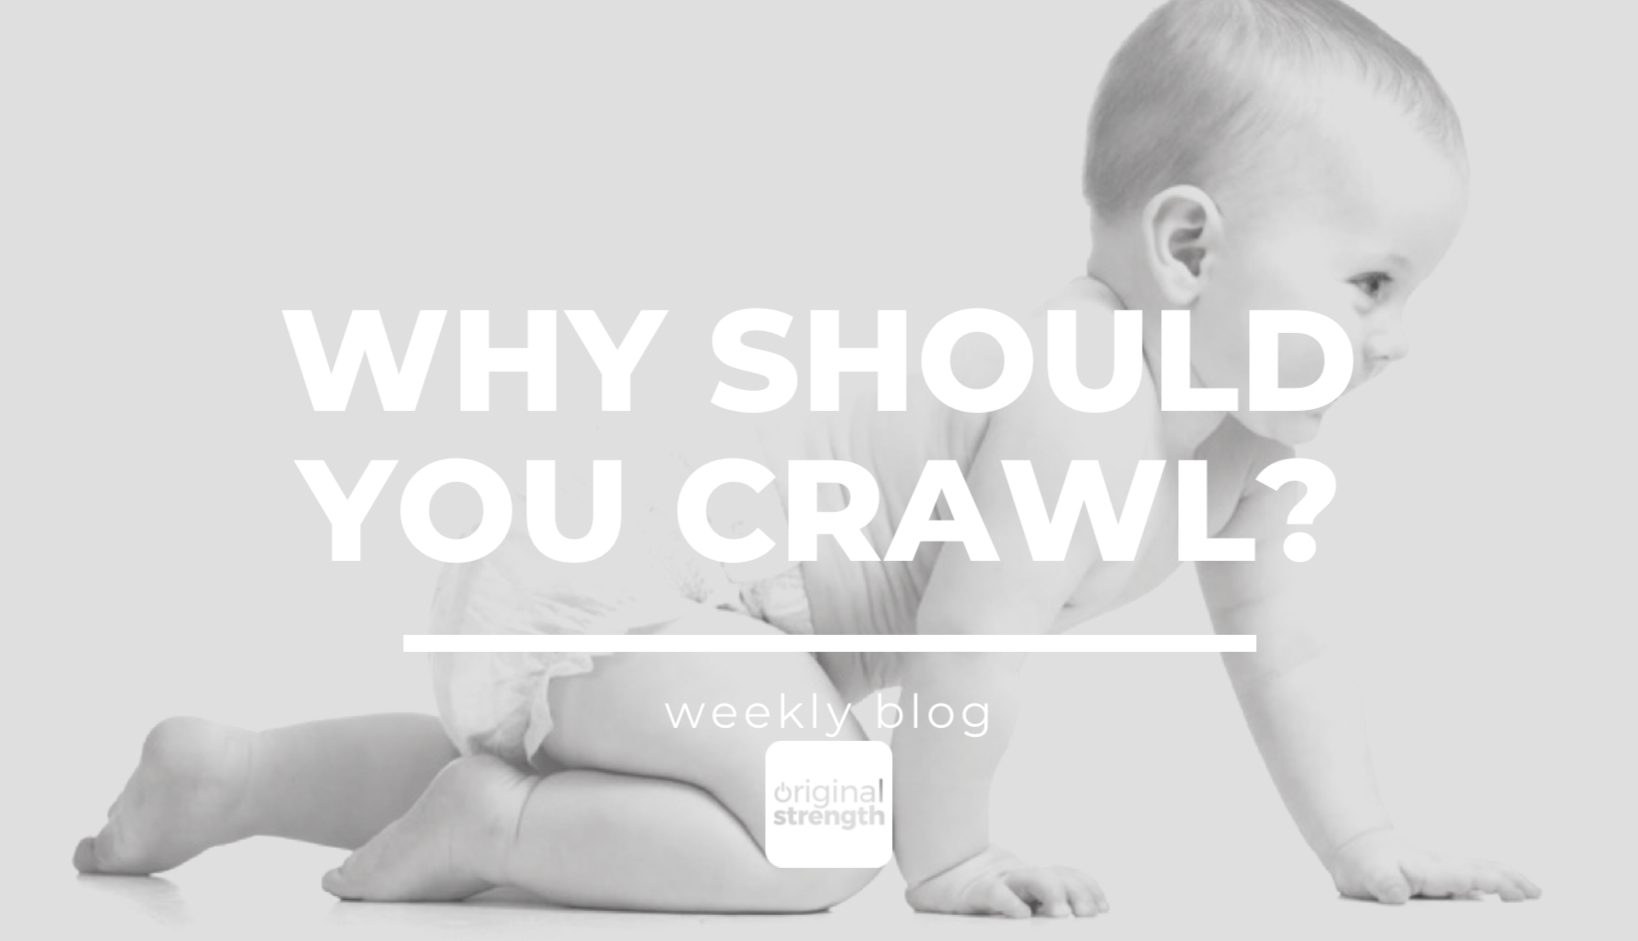 Why should you crawl?